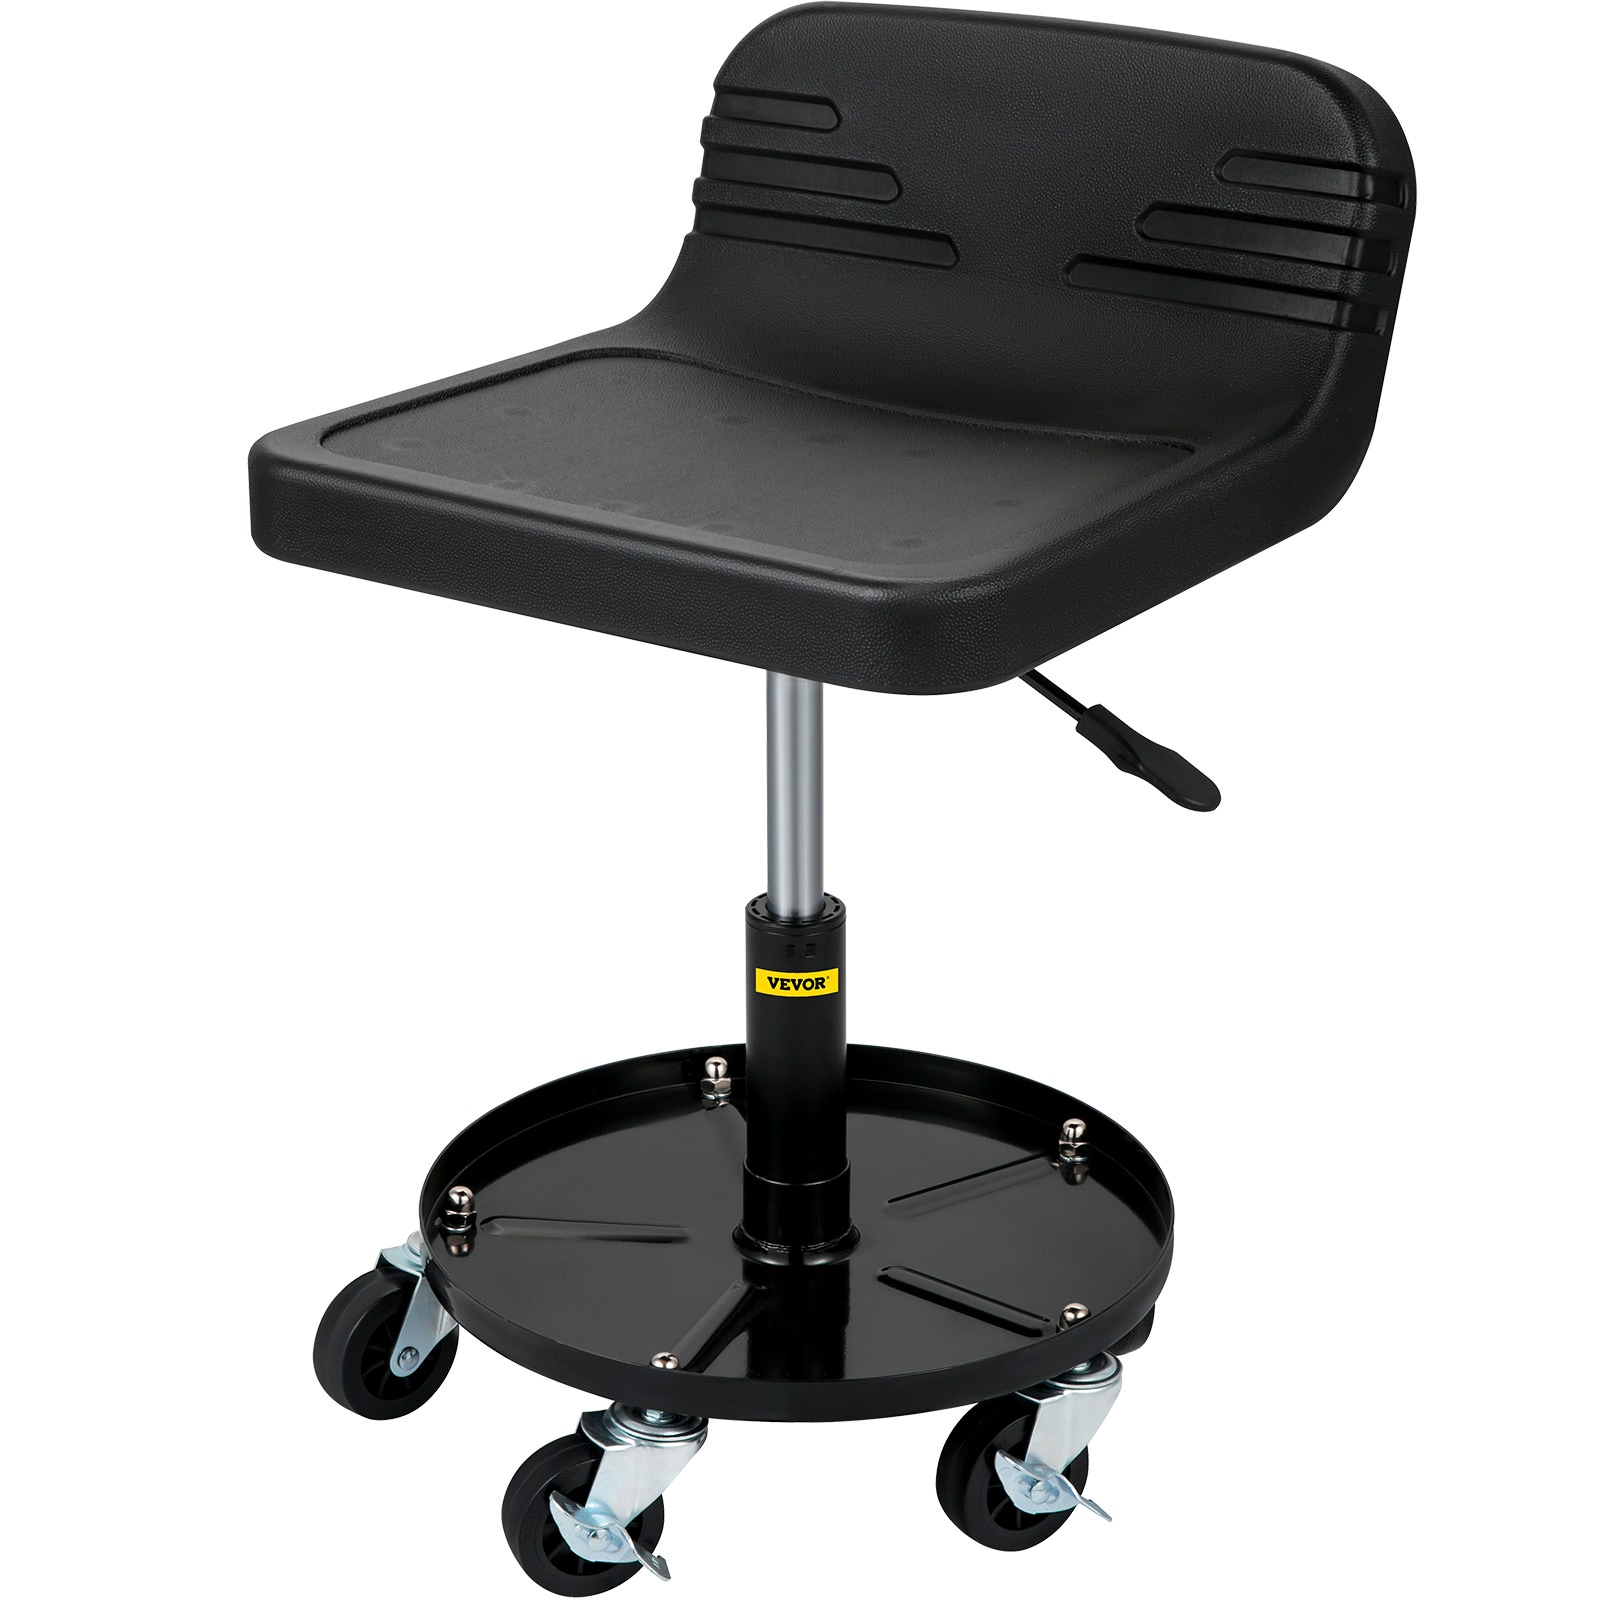 CRAFTSMAN 28.5-in x 17-in Work Seat in the Creepers & Work Seats